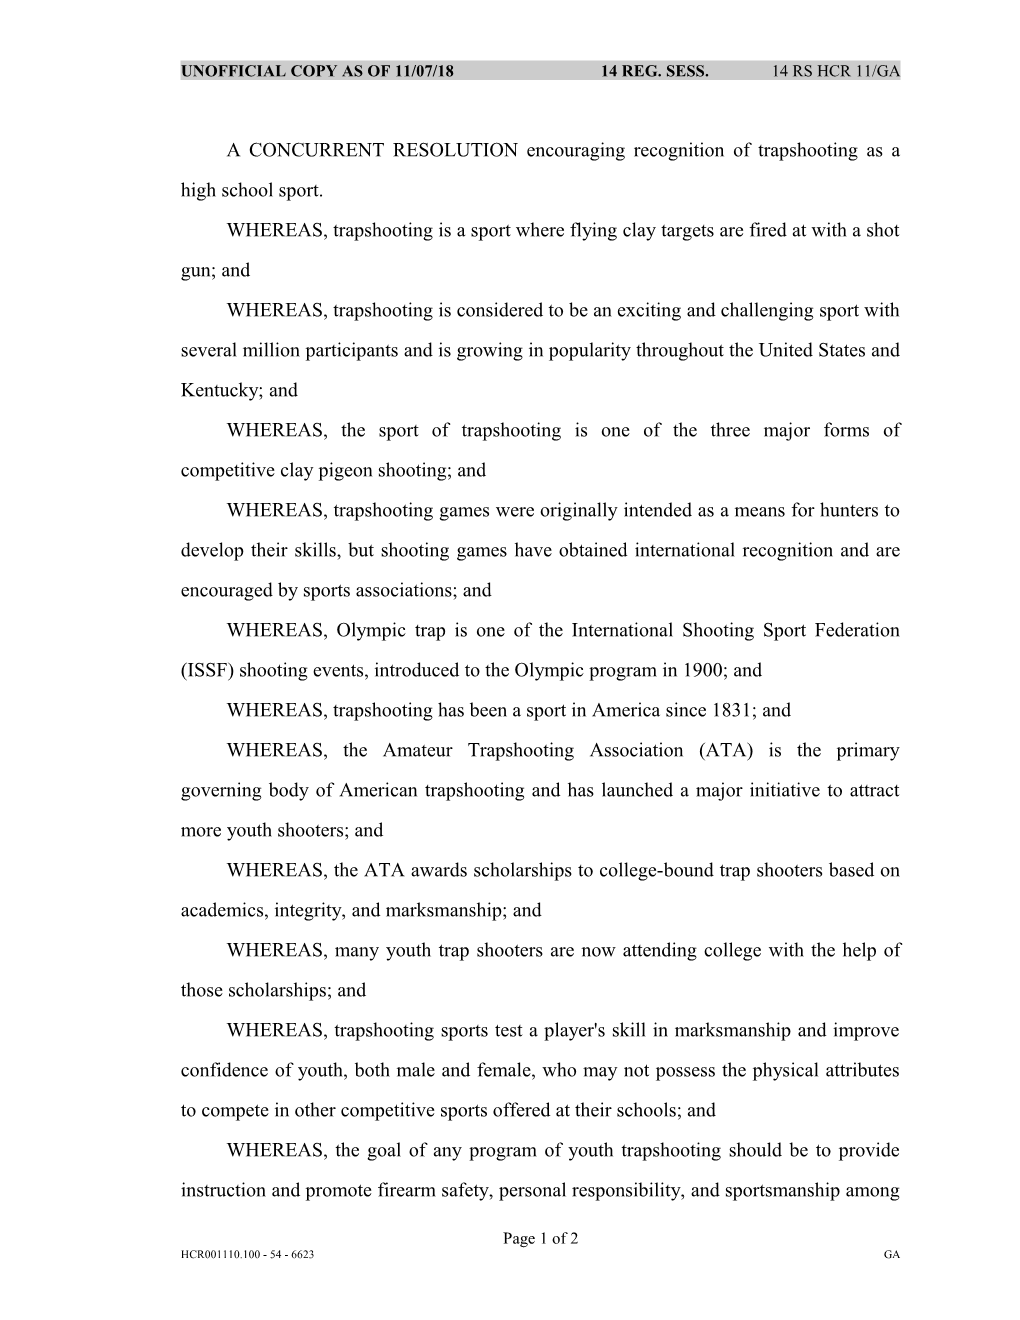 A CONCURRENT RESOLUTION Encouraging Recognition of Trapshooting As a High School Sport